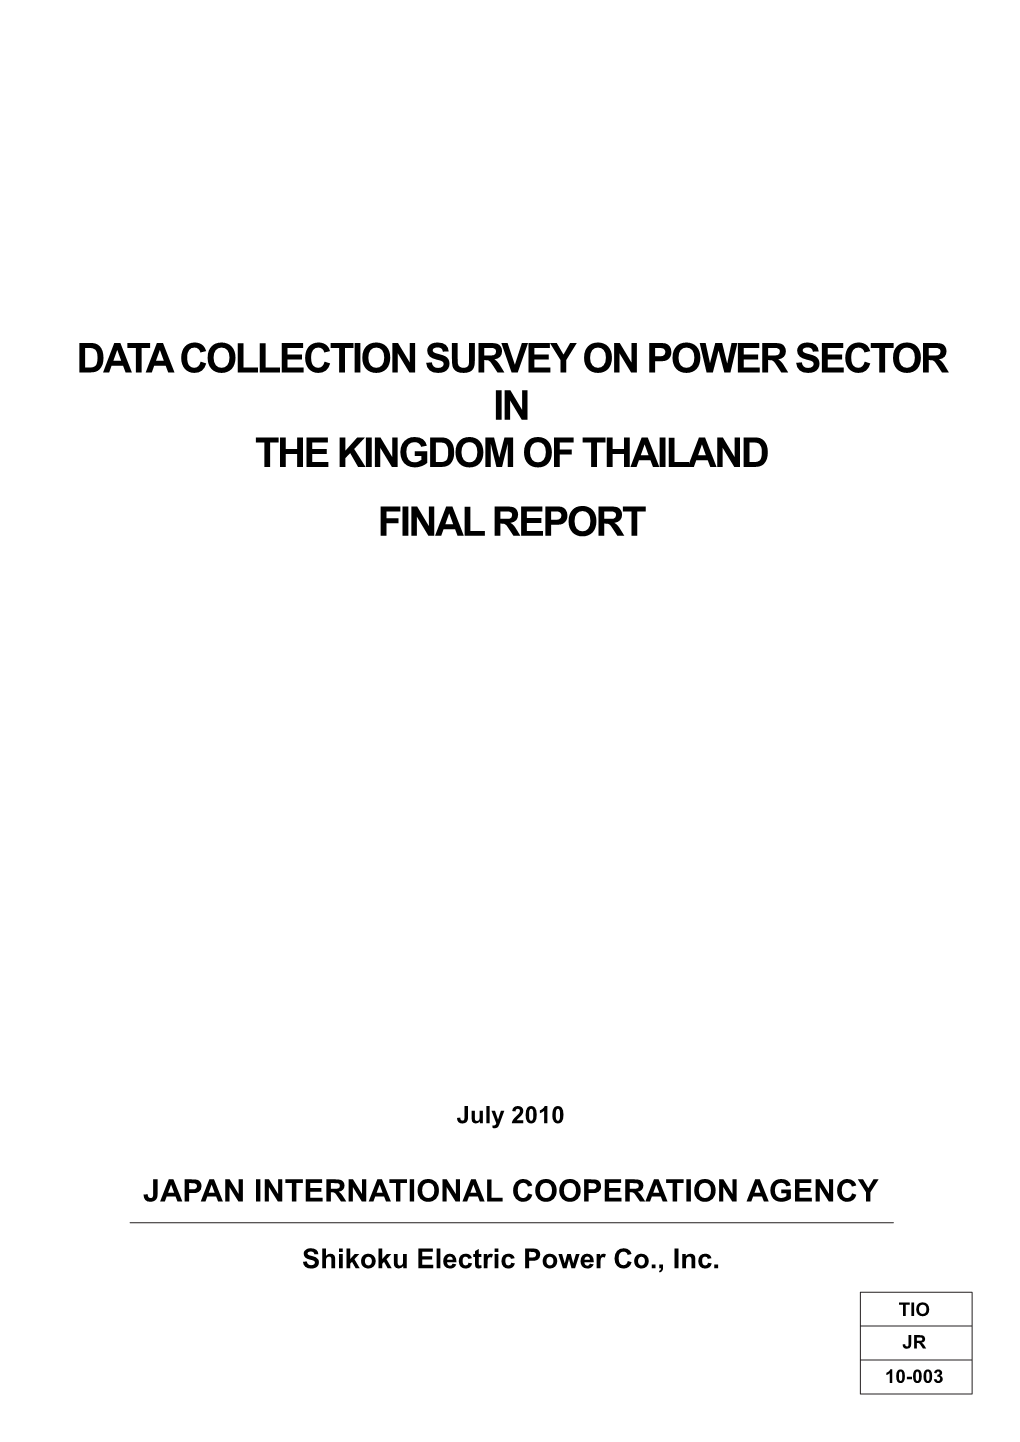 Data Collection Survey on Power Sector in the Kingdom of Thailand Final Report